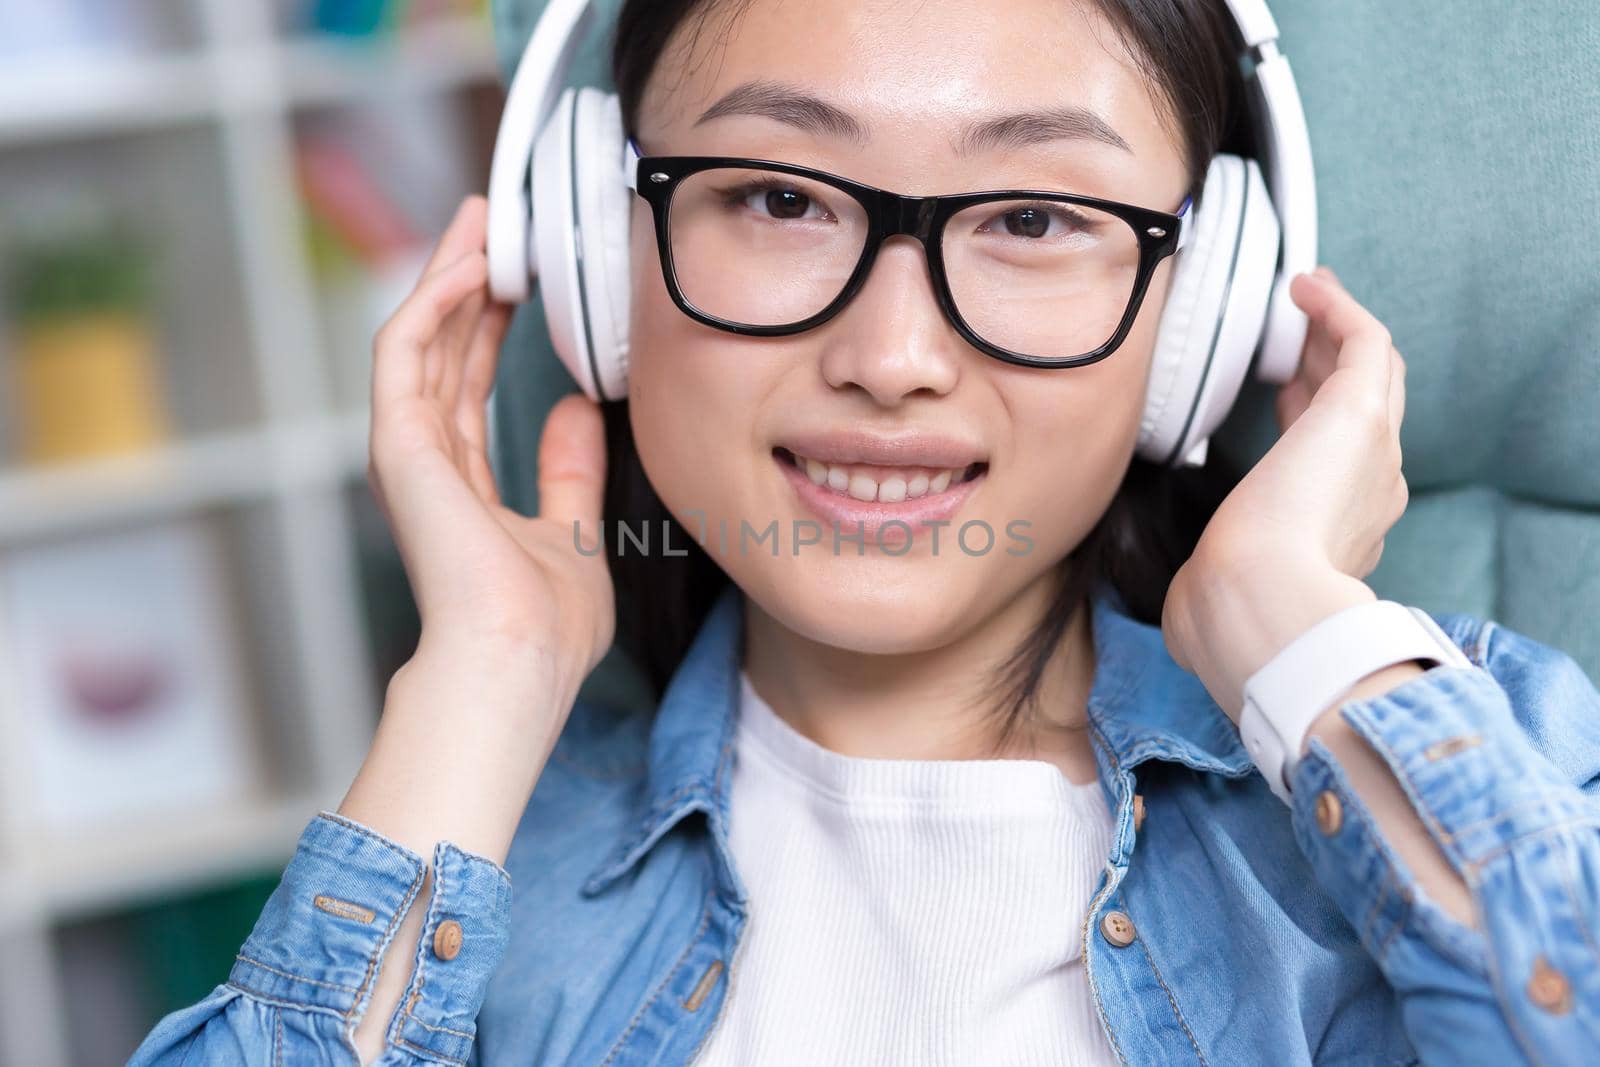 Portrait of a young Asian teenage girl listening to music in white headphones photo close up portrait.